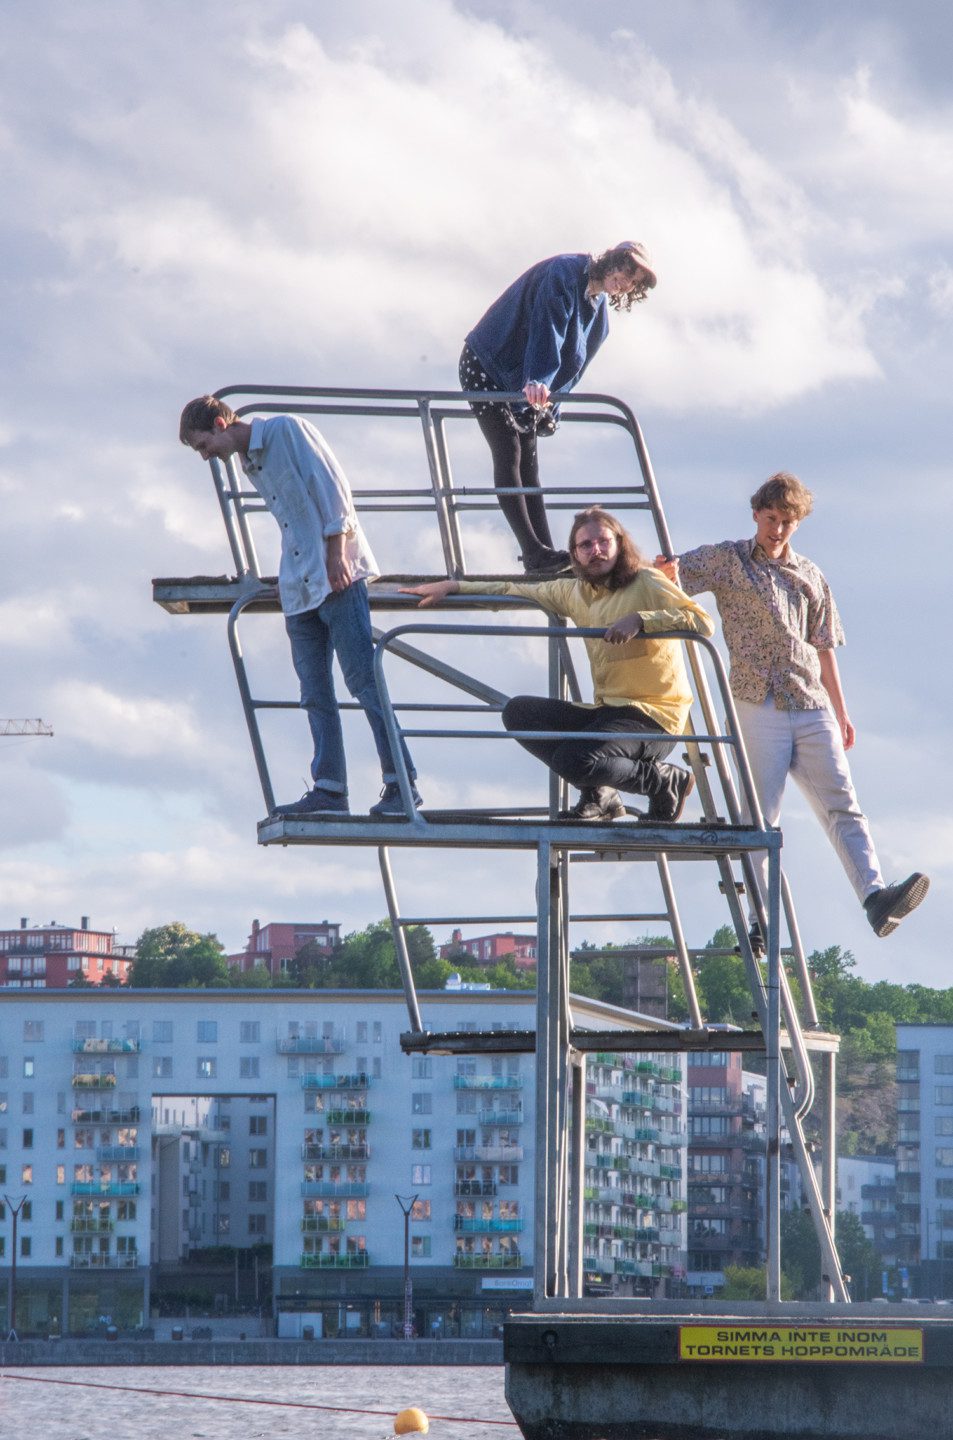 Photograph of the band Melby, lined up posing  on a diving tower